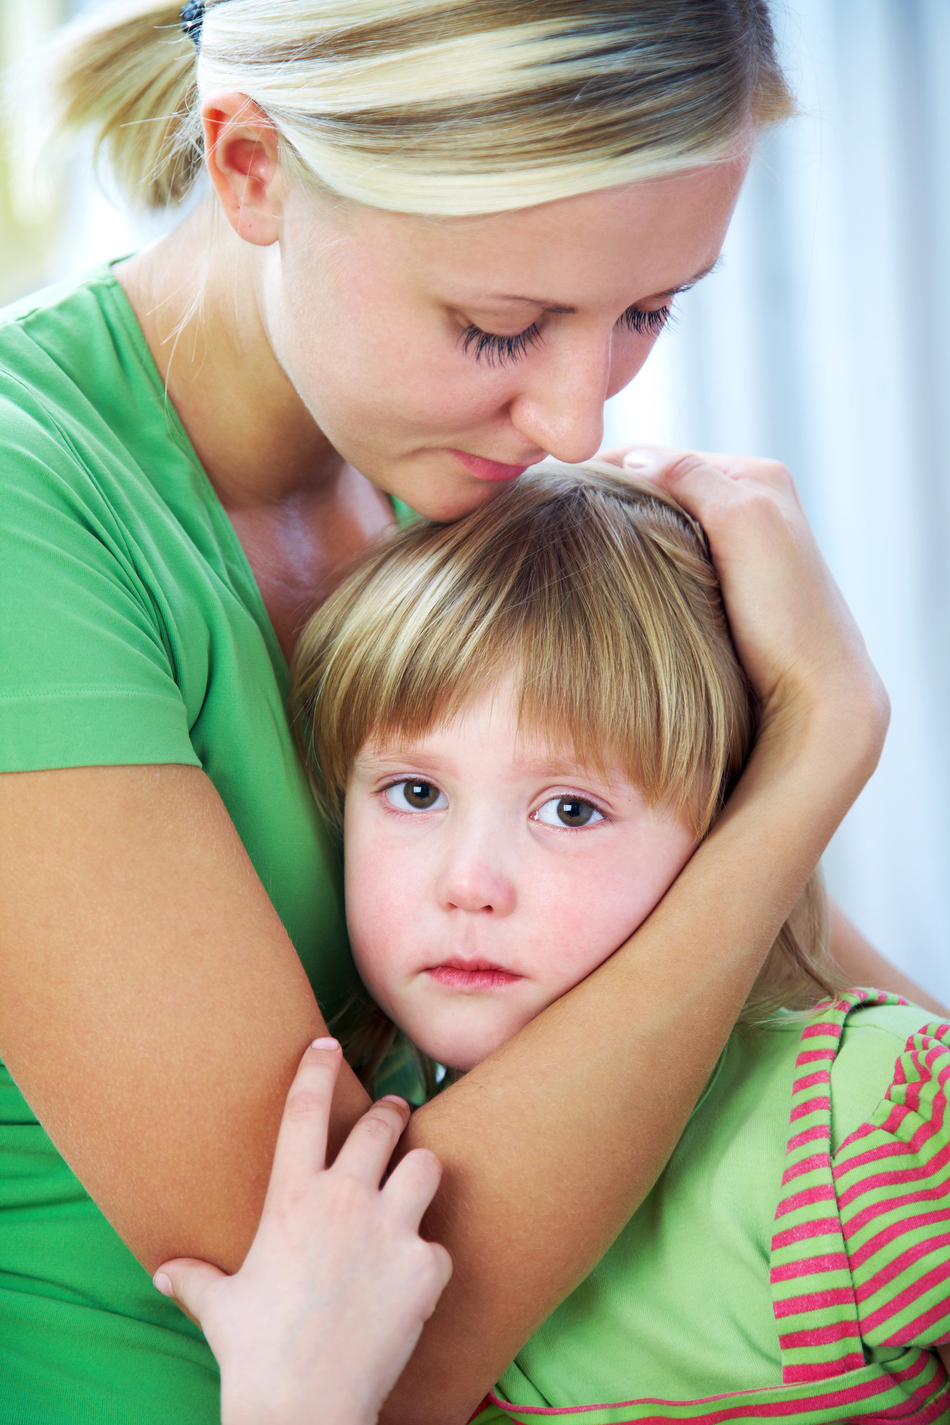 What You Can Do to Help Your Child with Anxiety